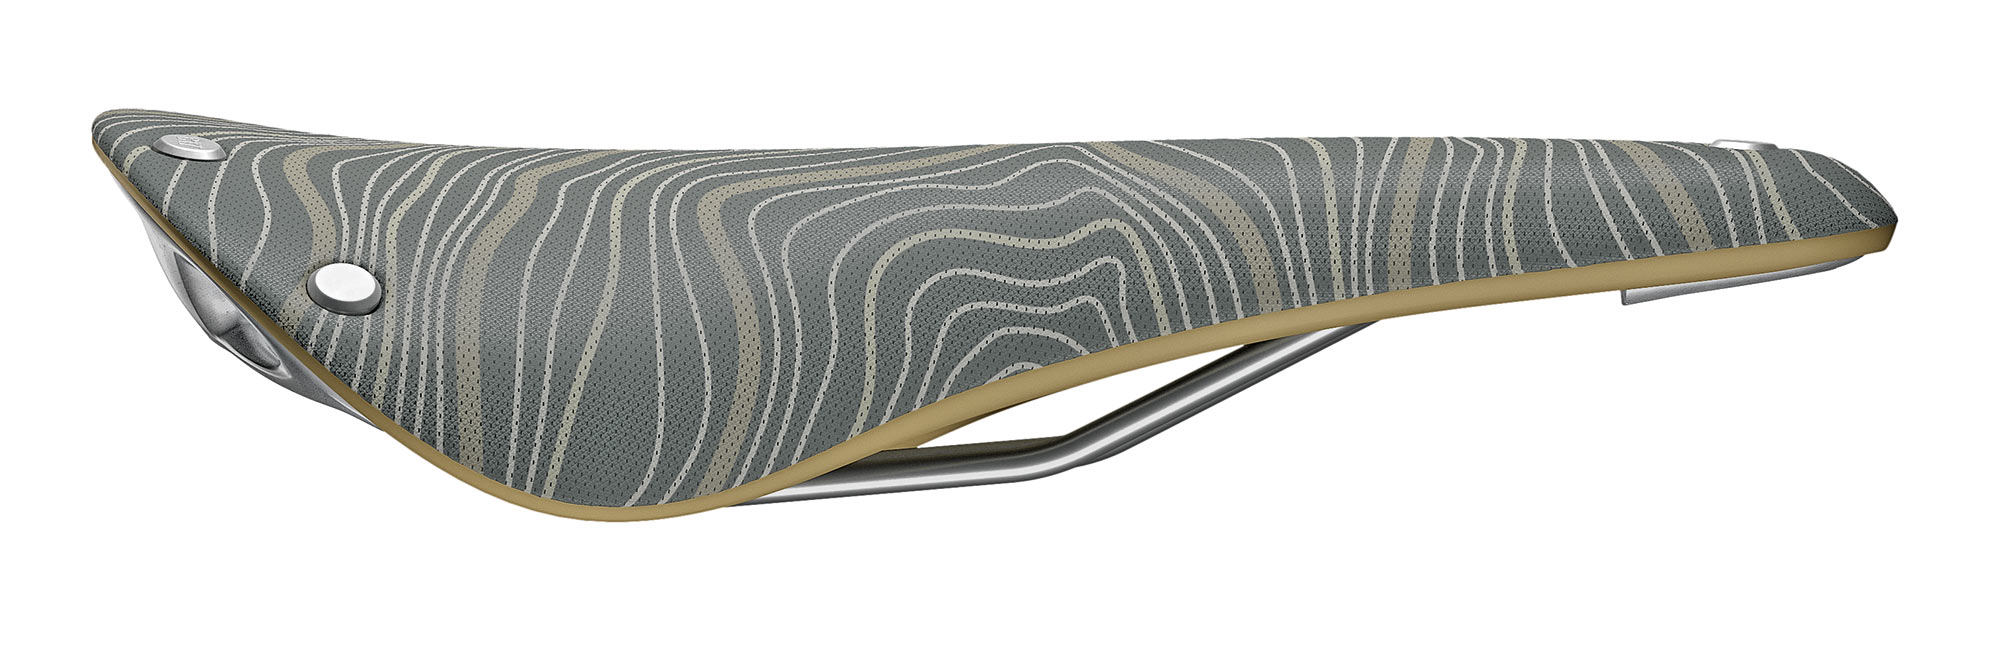 Brooks C17 Special LAB is a limited edition Cambium saddle - Bikerumor